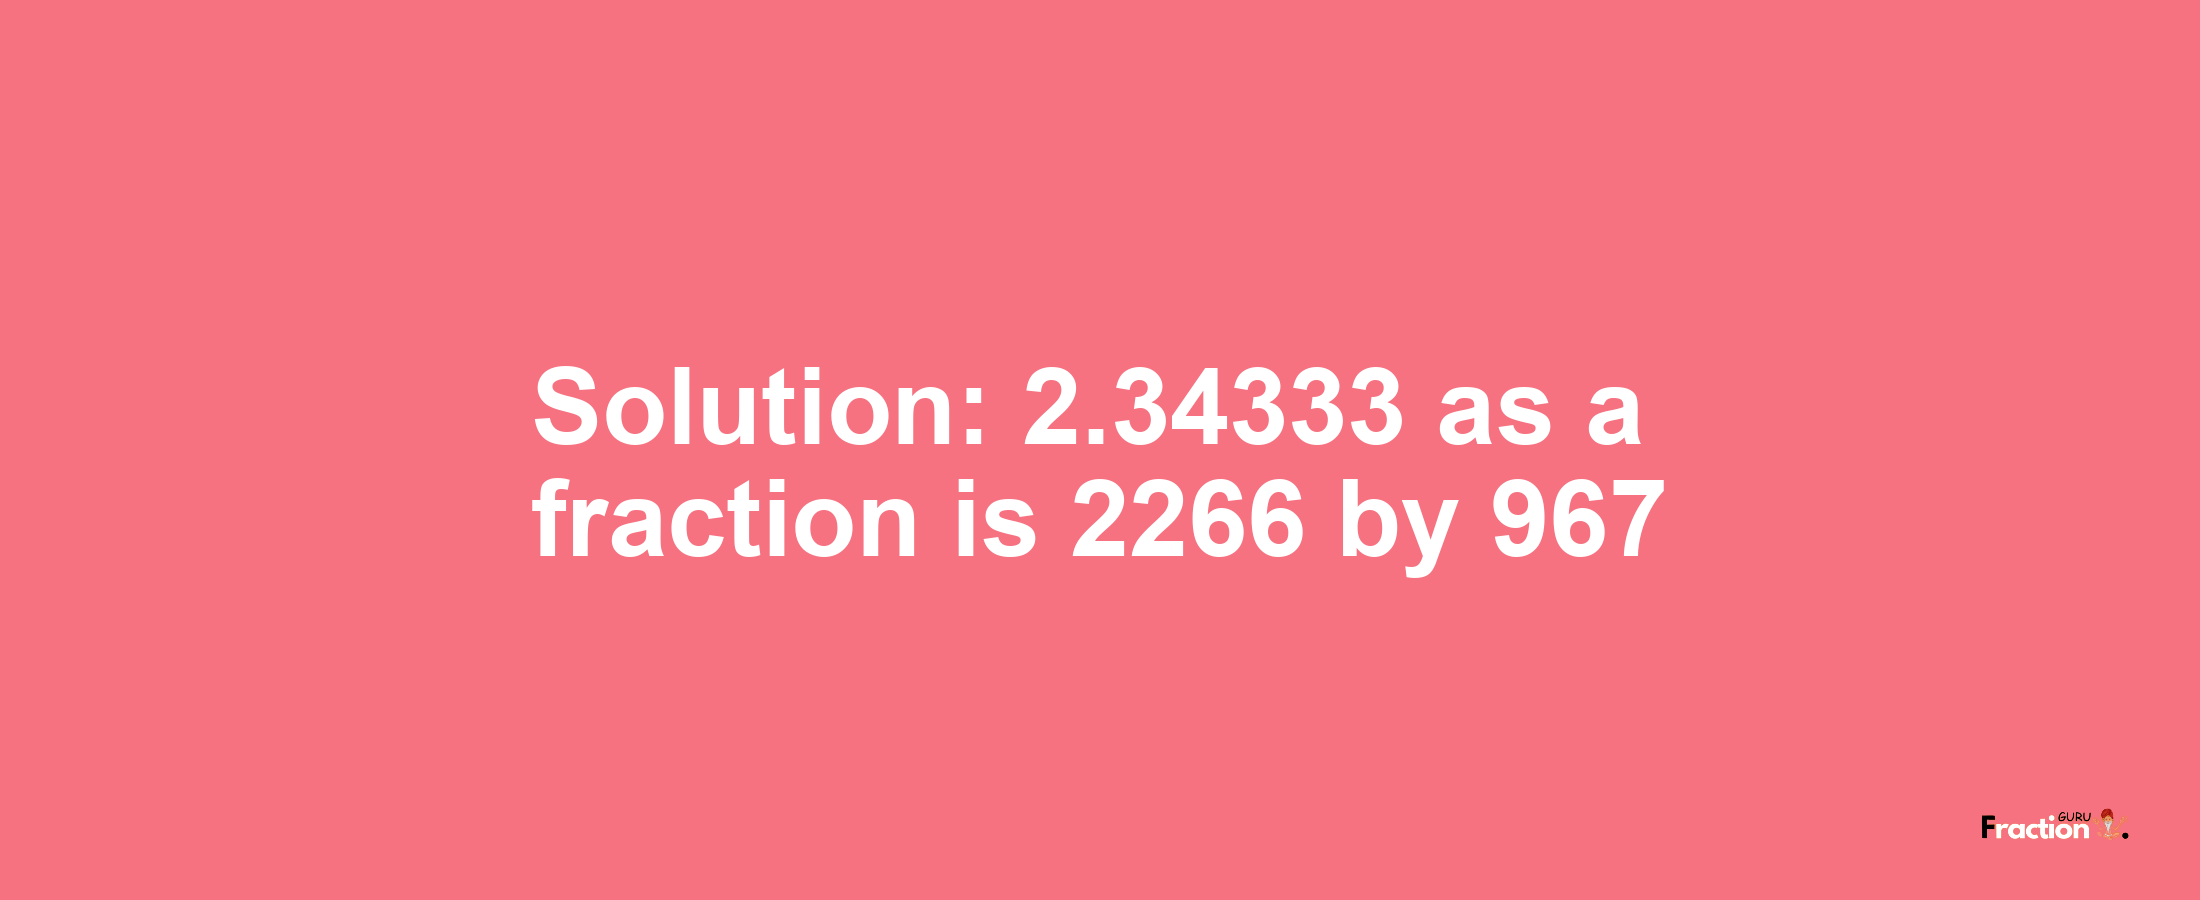 Solution:2.34333 as a fraction is 2266/967